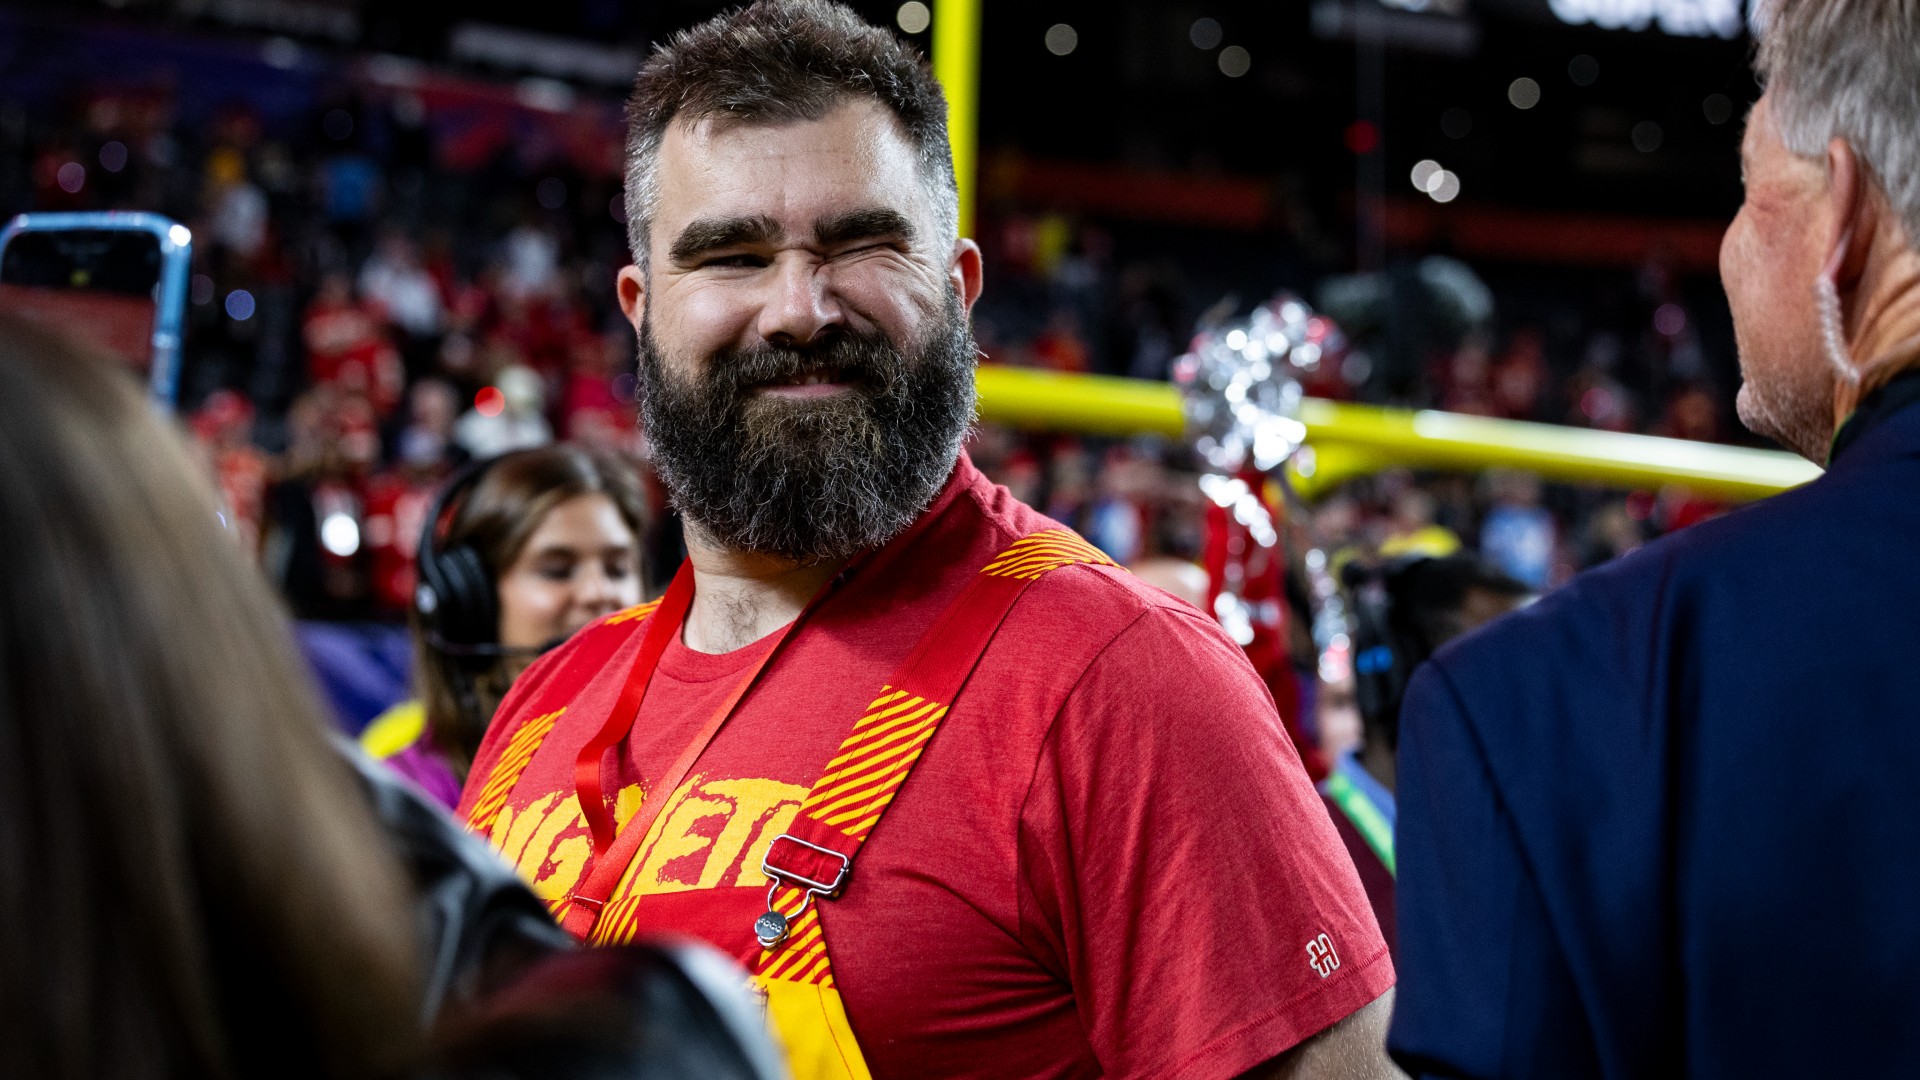 Jason Kelce vows to return young fan’s lucky mask